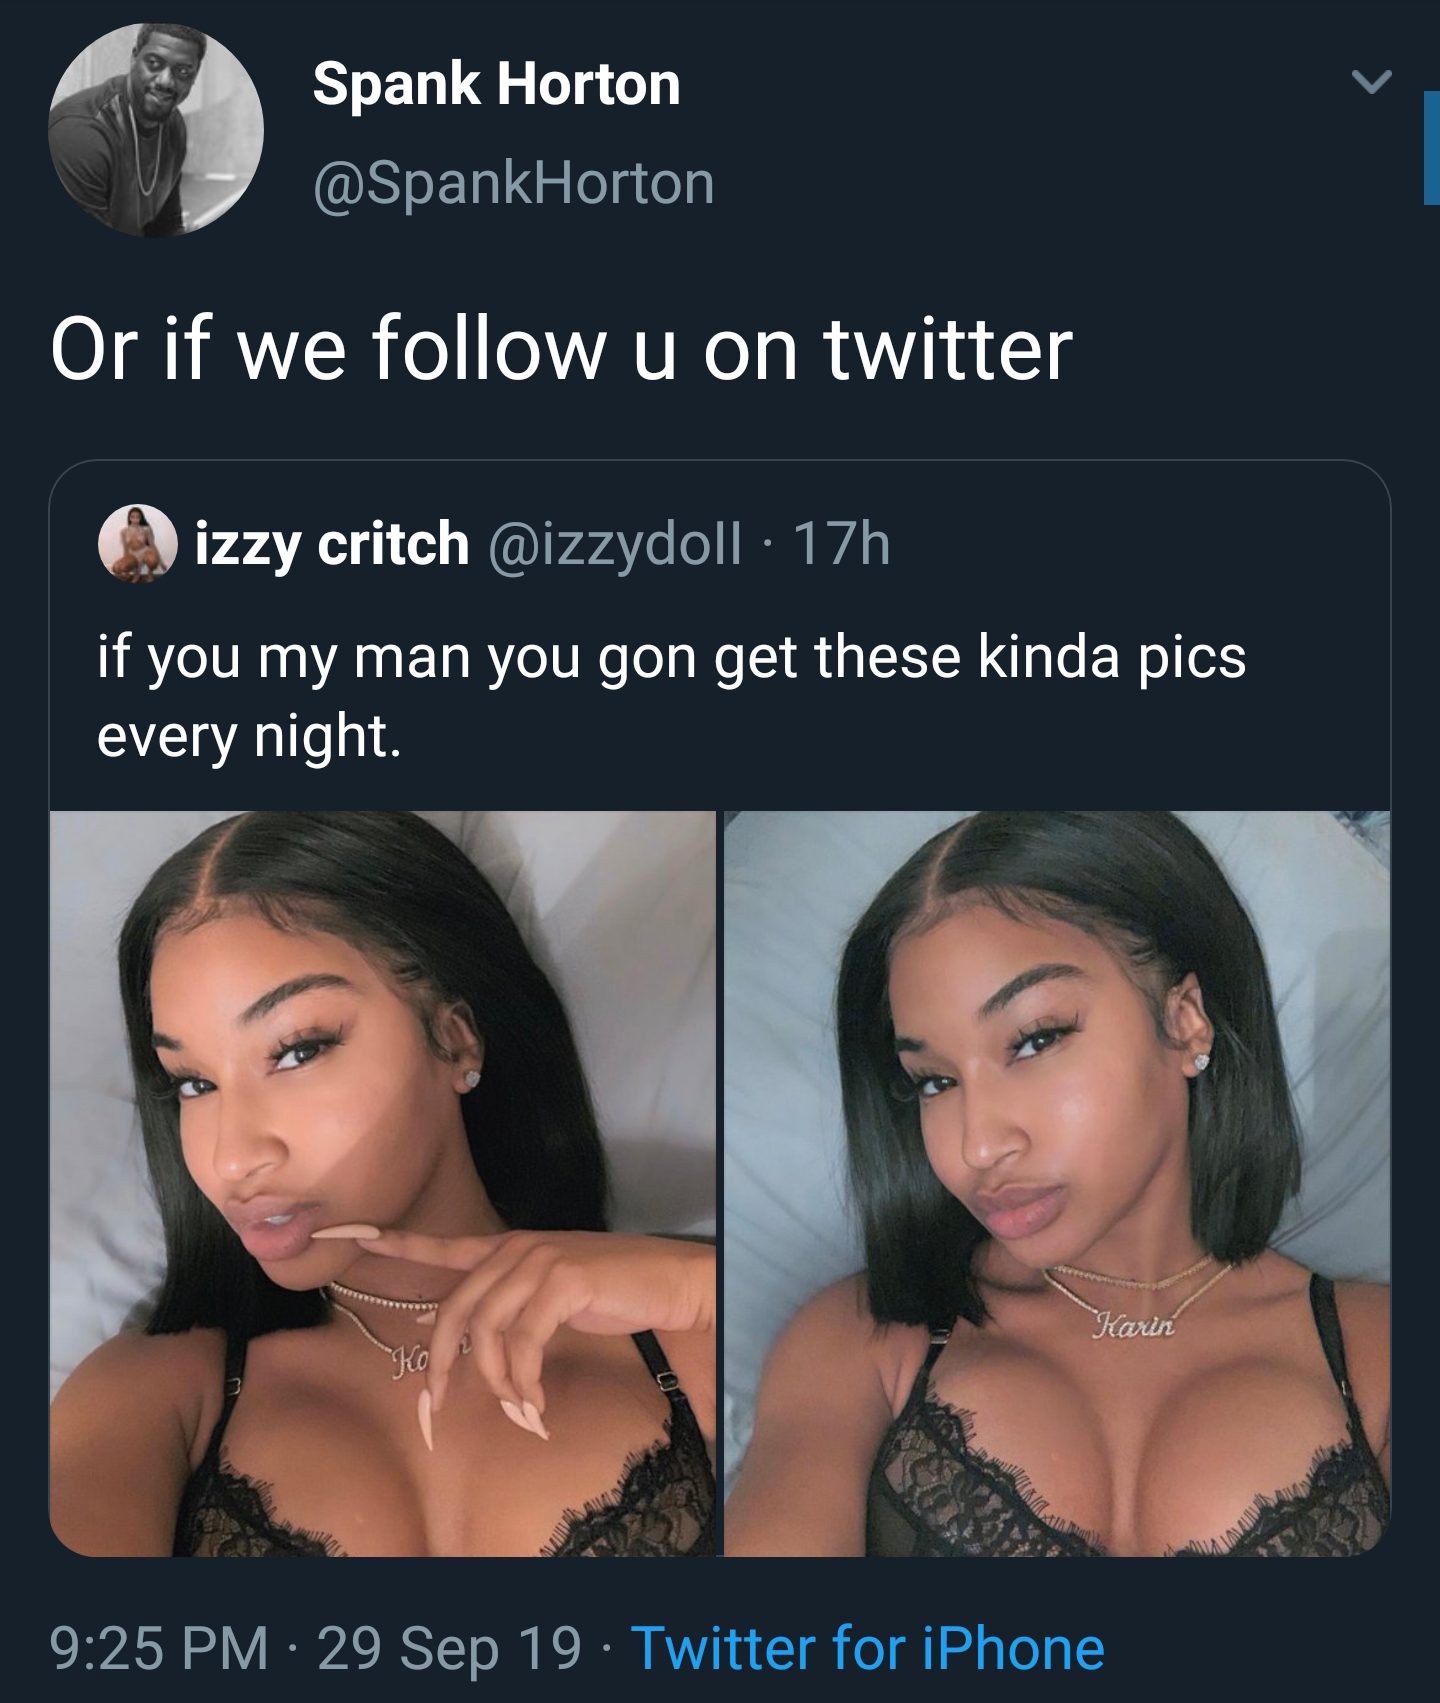 black twitter - Spank Horton Or if we u on twitter izzy critch . 17h if you my man you gon get these kinda pics every night. 29 Sep 19 Twitter for iPhone